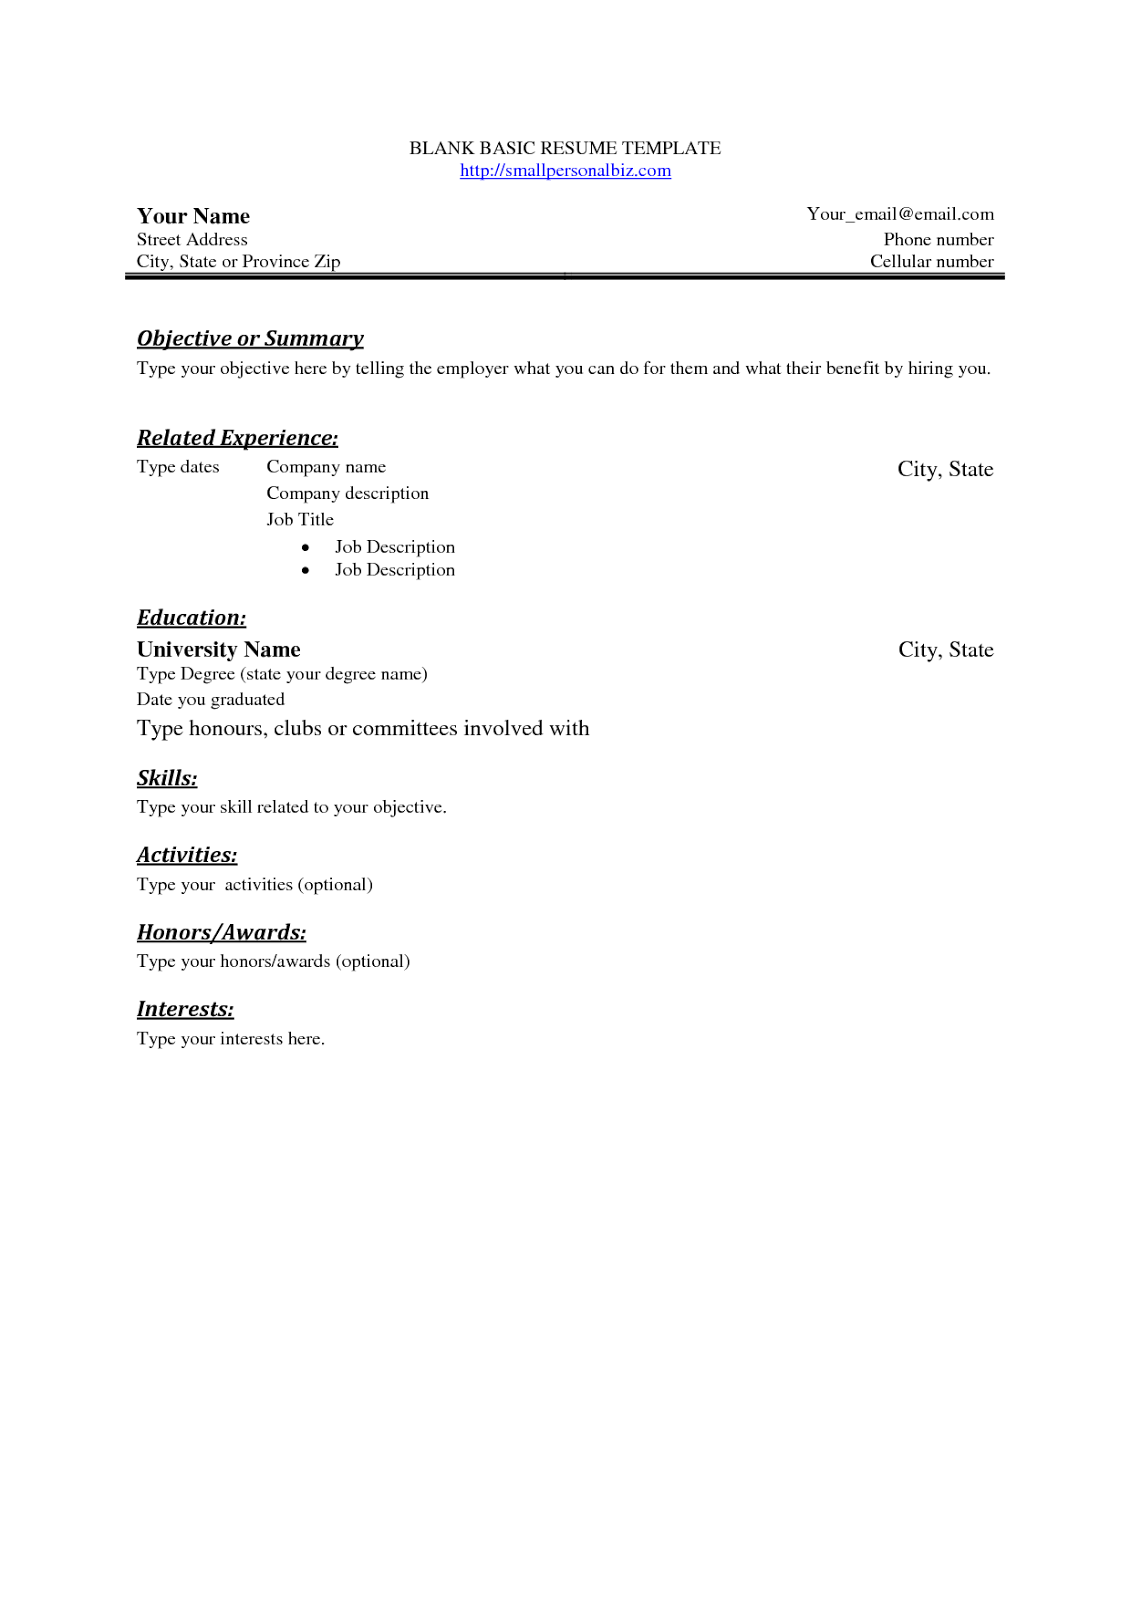 Free resume fillable templates